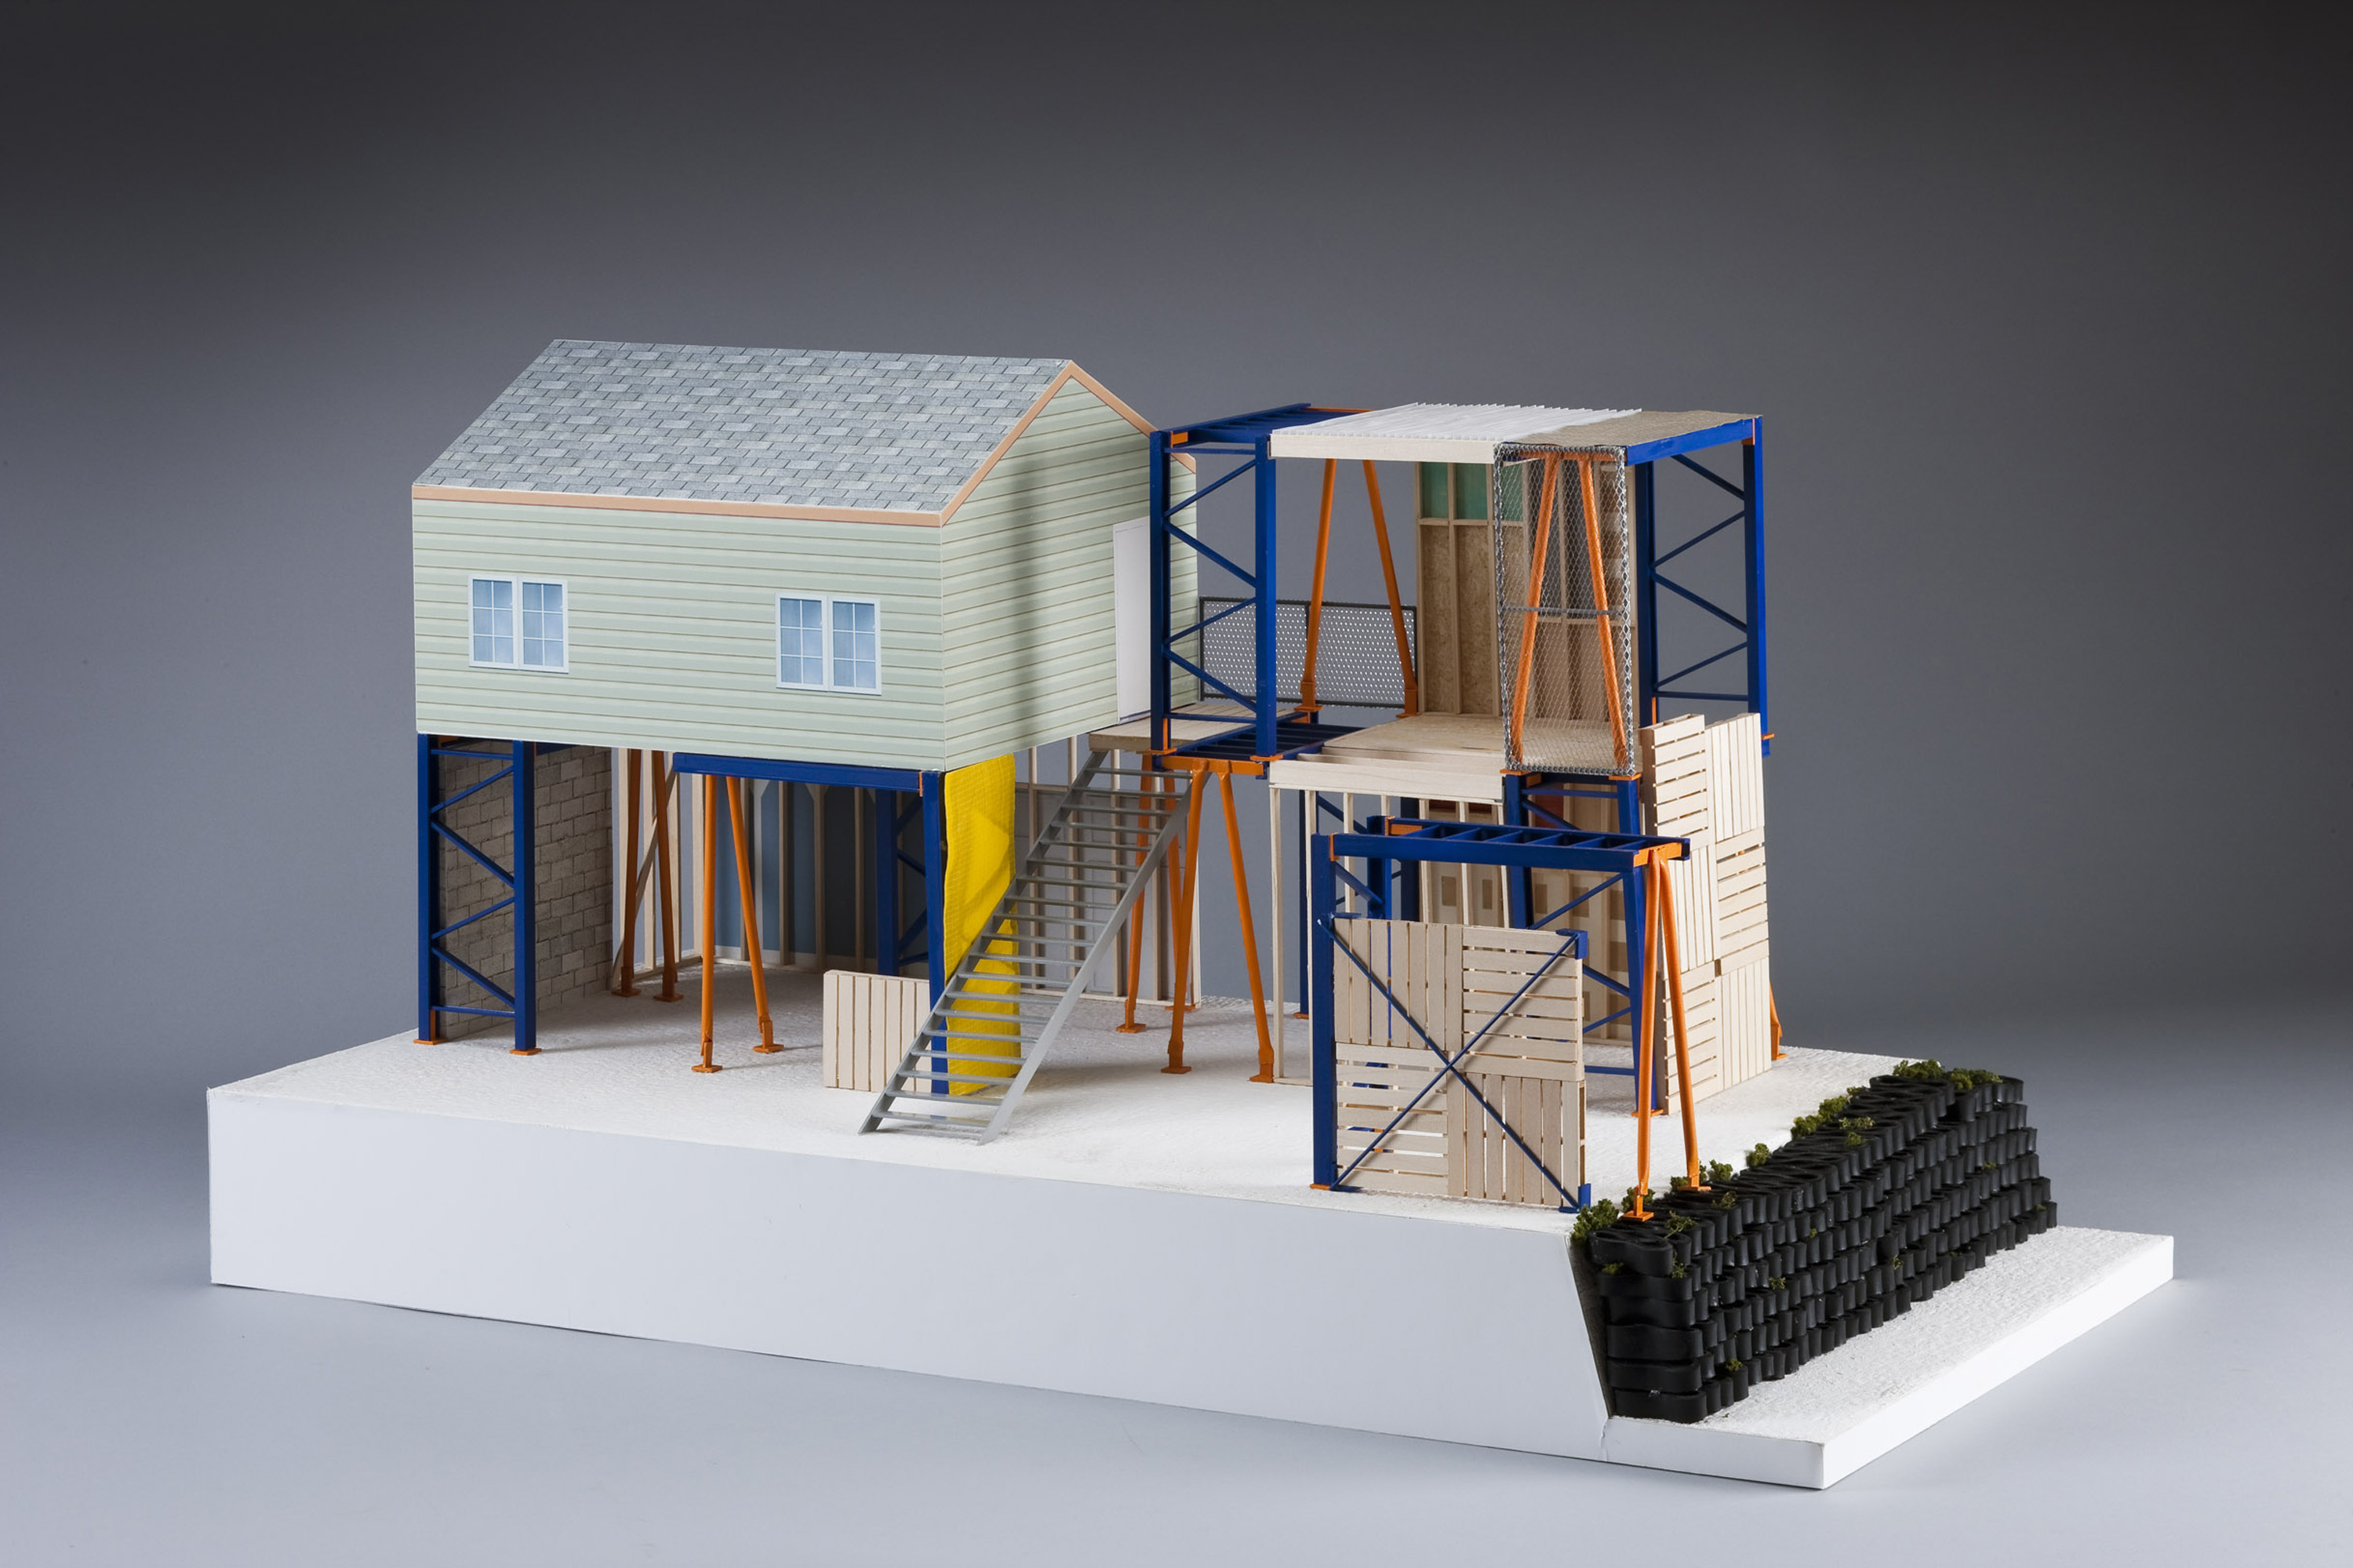 An architectural model of a house in progress